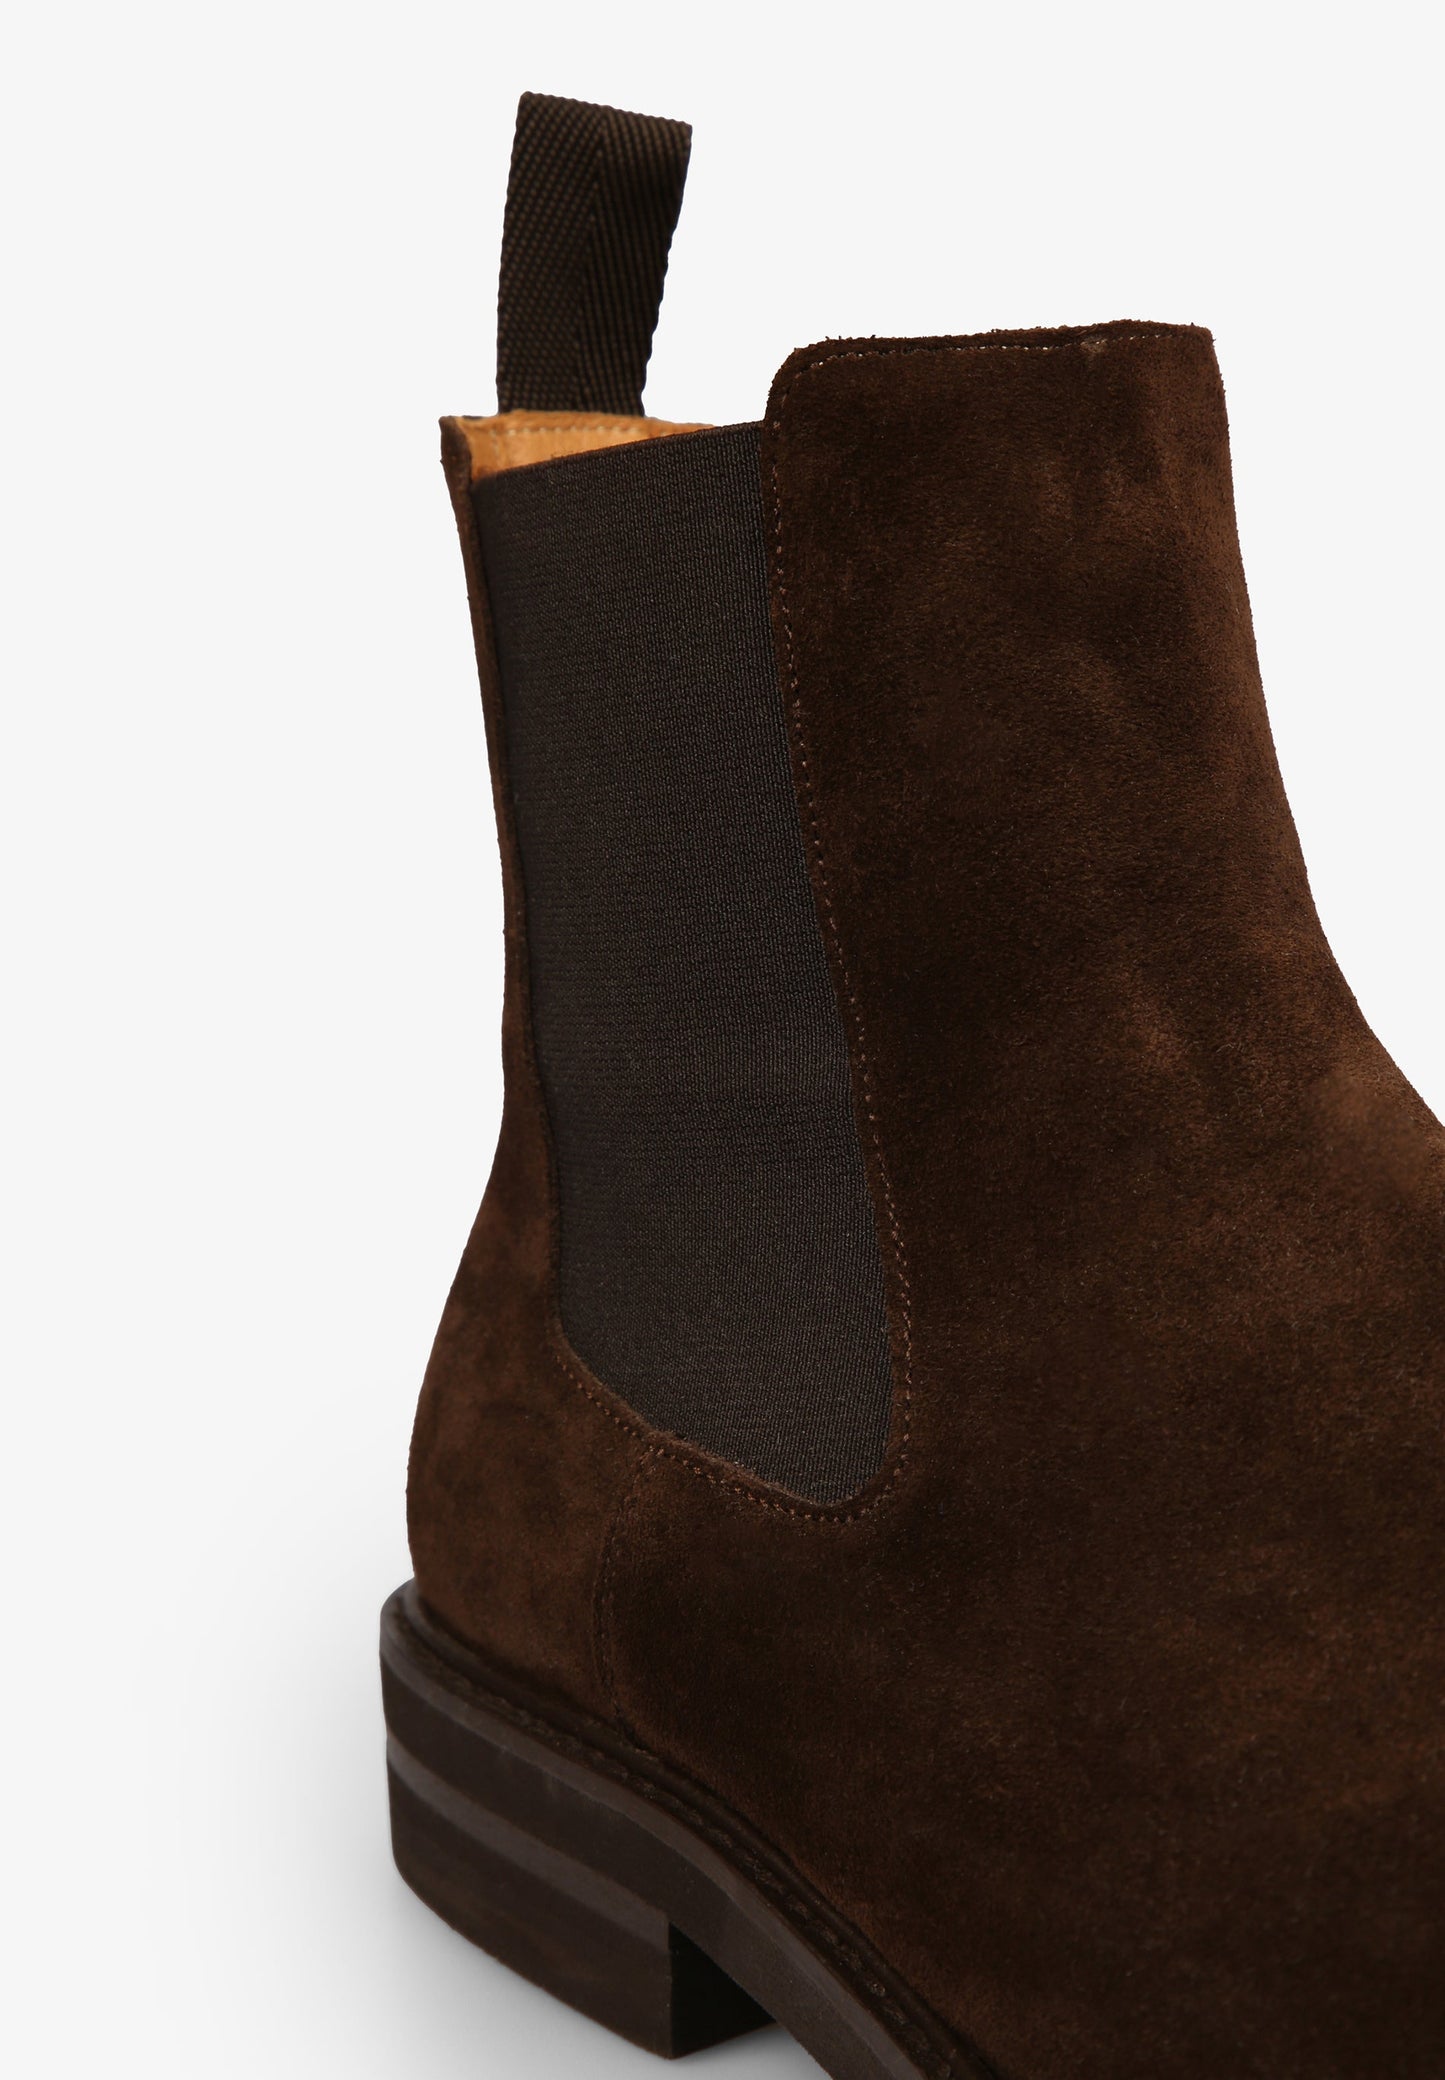 NOS CHELSEA BOOTS